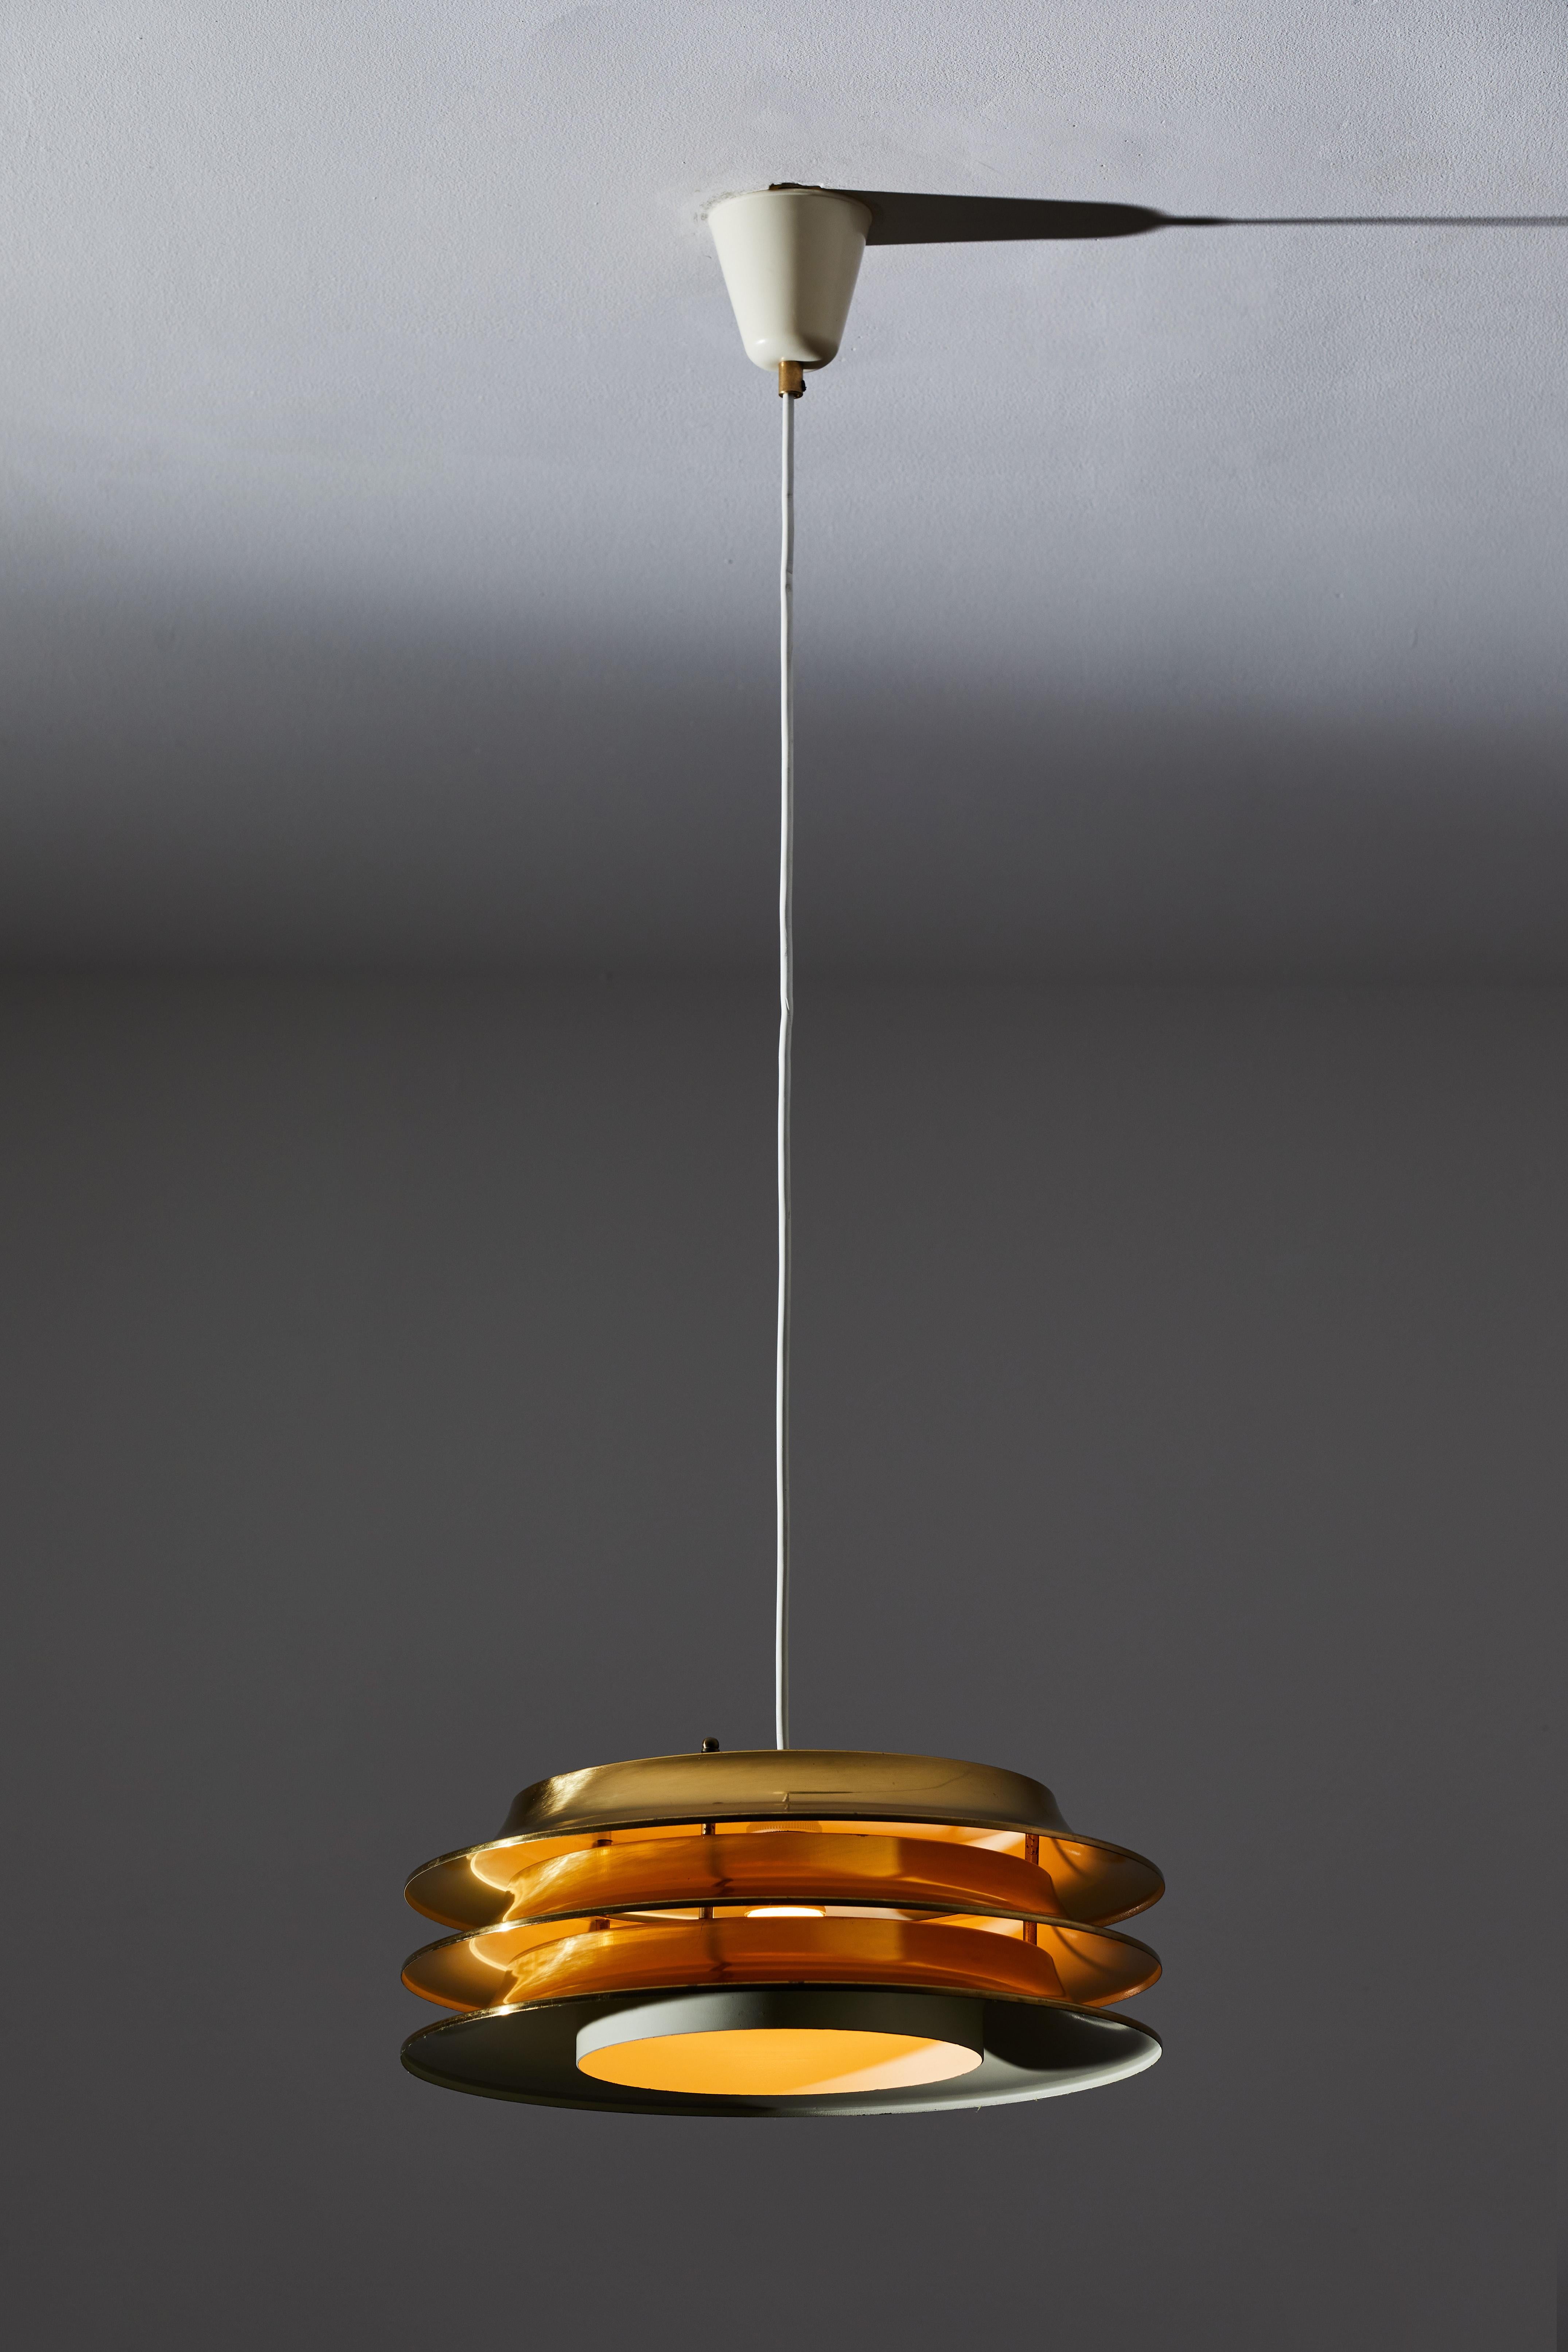 Two suspension lights by Kai Ruokonen for Lynx Edition. Designed and manufactured in Finland, circa 1960s. Brass, enameled brass. Rewired for U.S. junction boxes. One has a black canopy, one has a white canopy. Each light takes one E27 60w maximum